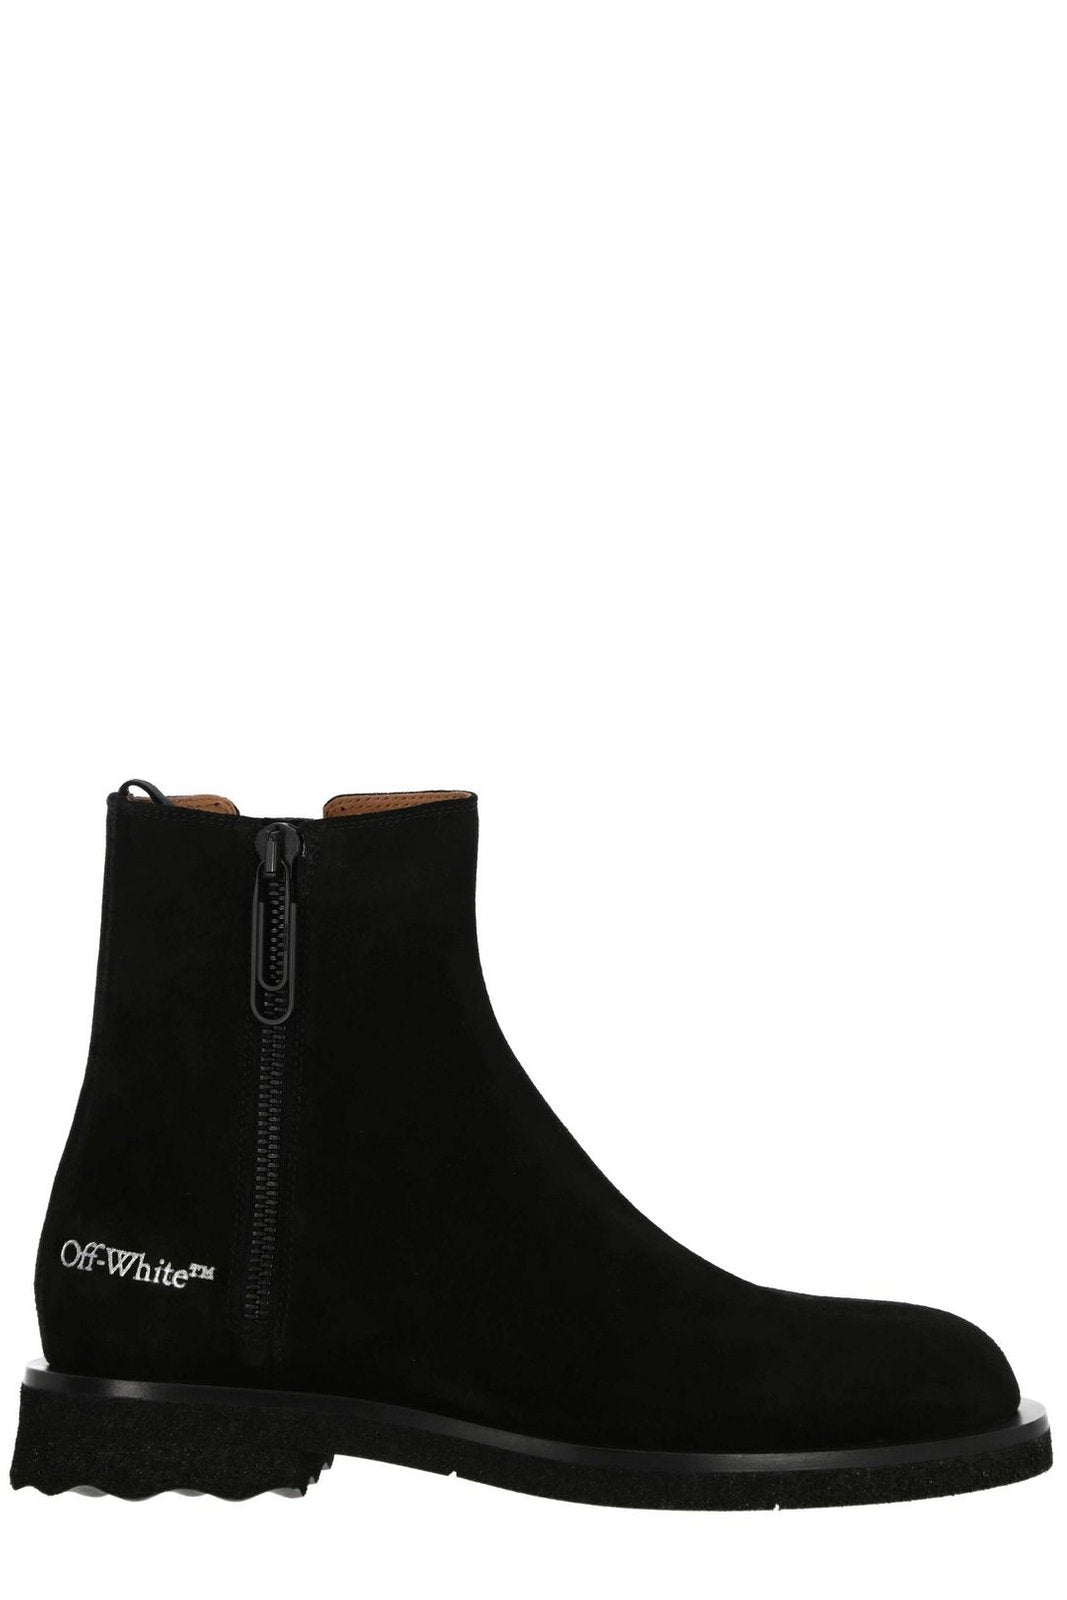 Off-White Logo-Printed Side-Zip Ankle Boots